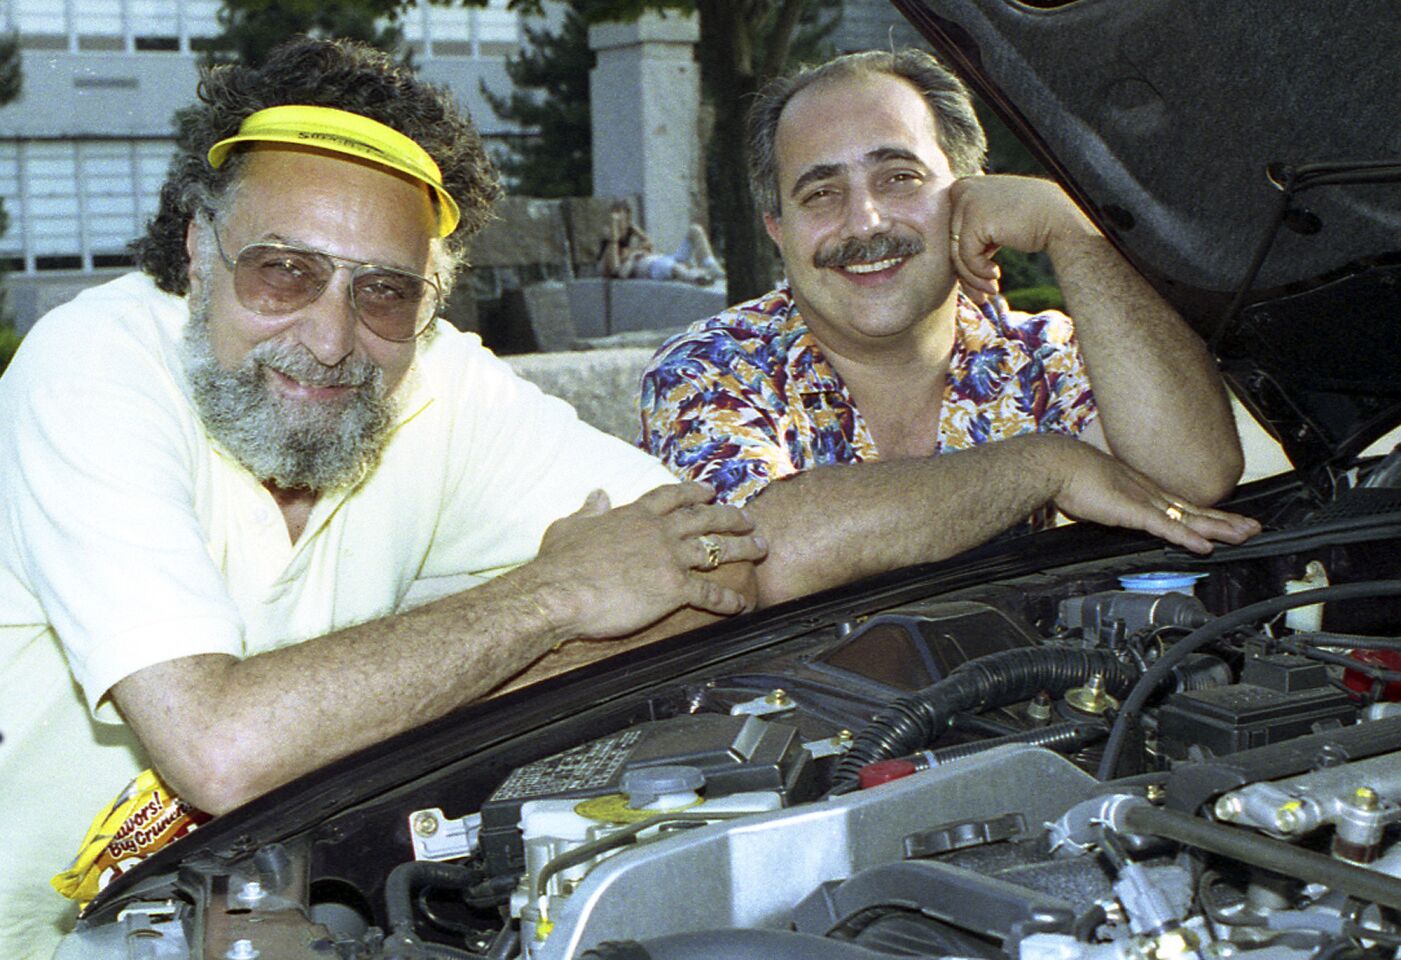 Tom Magliozzi, left, along with his brother Ray, for more than 35 years dispensed frequently good advice on "Car Talk," one of NPR's most popular and least serious programs. Tom Magliozzi was 77.